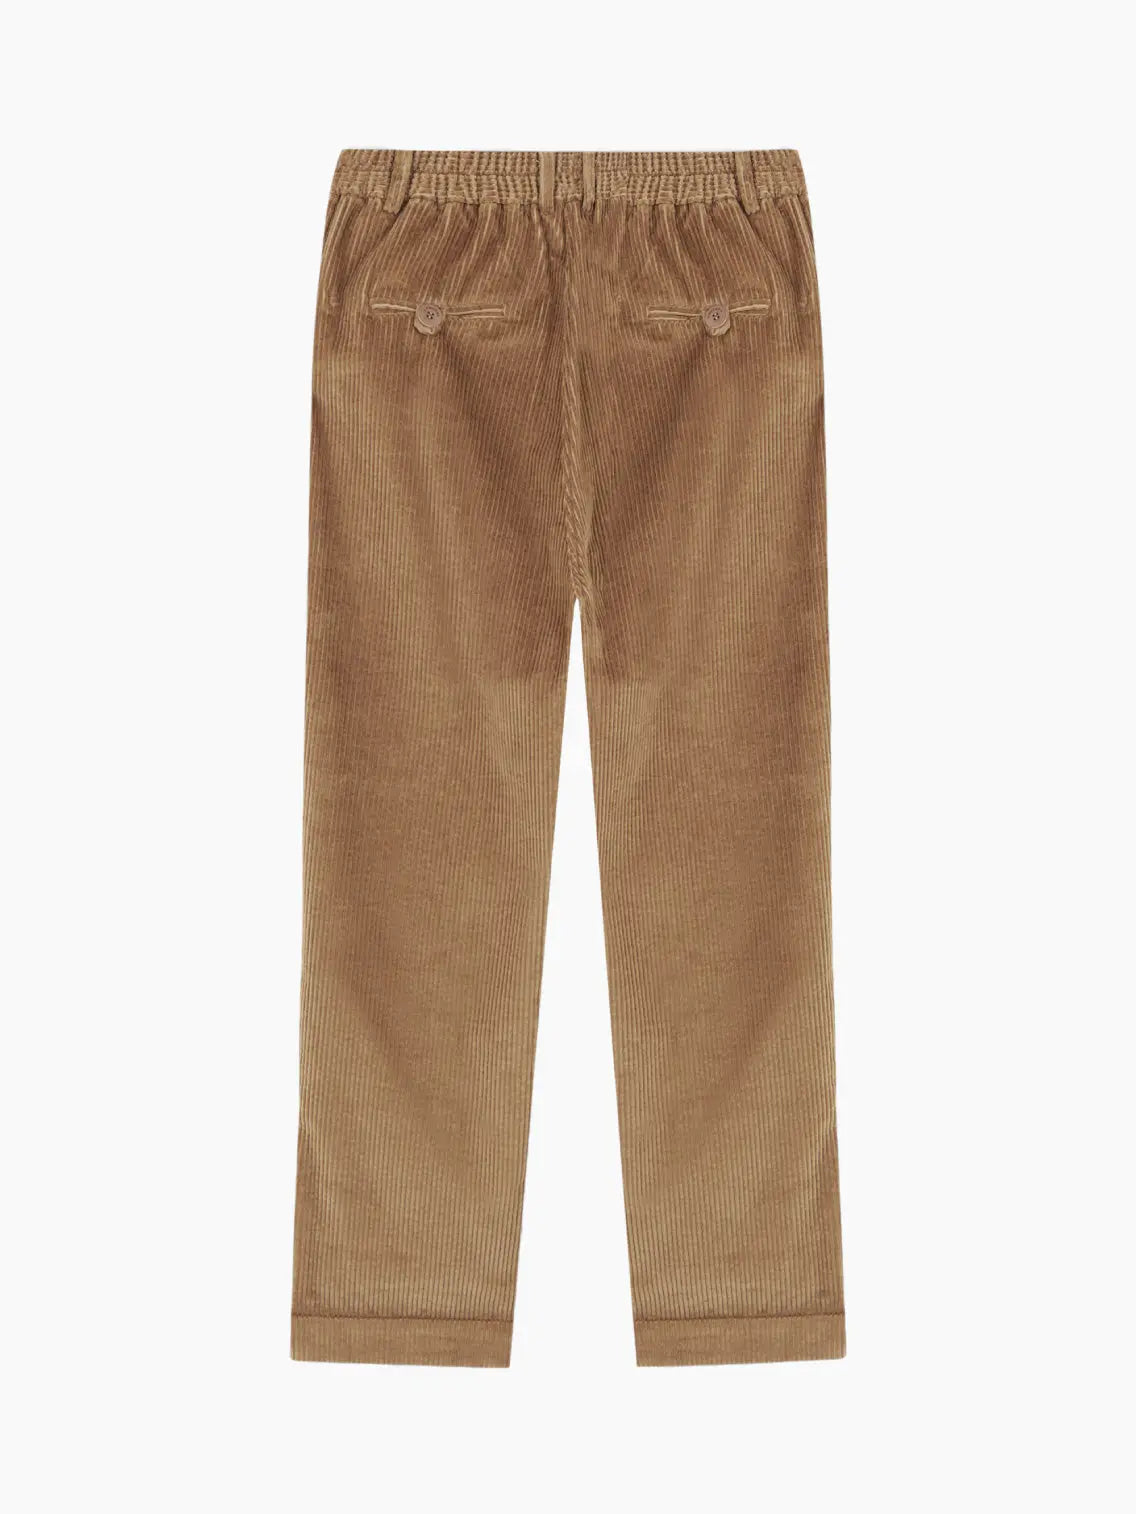 A pair of brown, straight-leg corduroy pants with a textured vertical ribbing pattern, featuring a button and zipper closure, belt loops, and front pleats. The Cotton Corduroy Pants Miel by Cordera are laid flat against a plain white background, reflecting the sophisticated style found at Bassalstore in Barcelona.